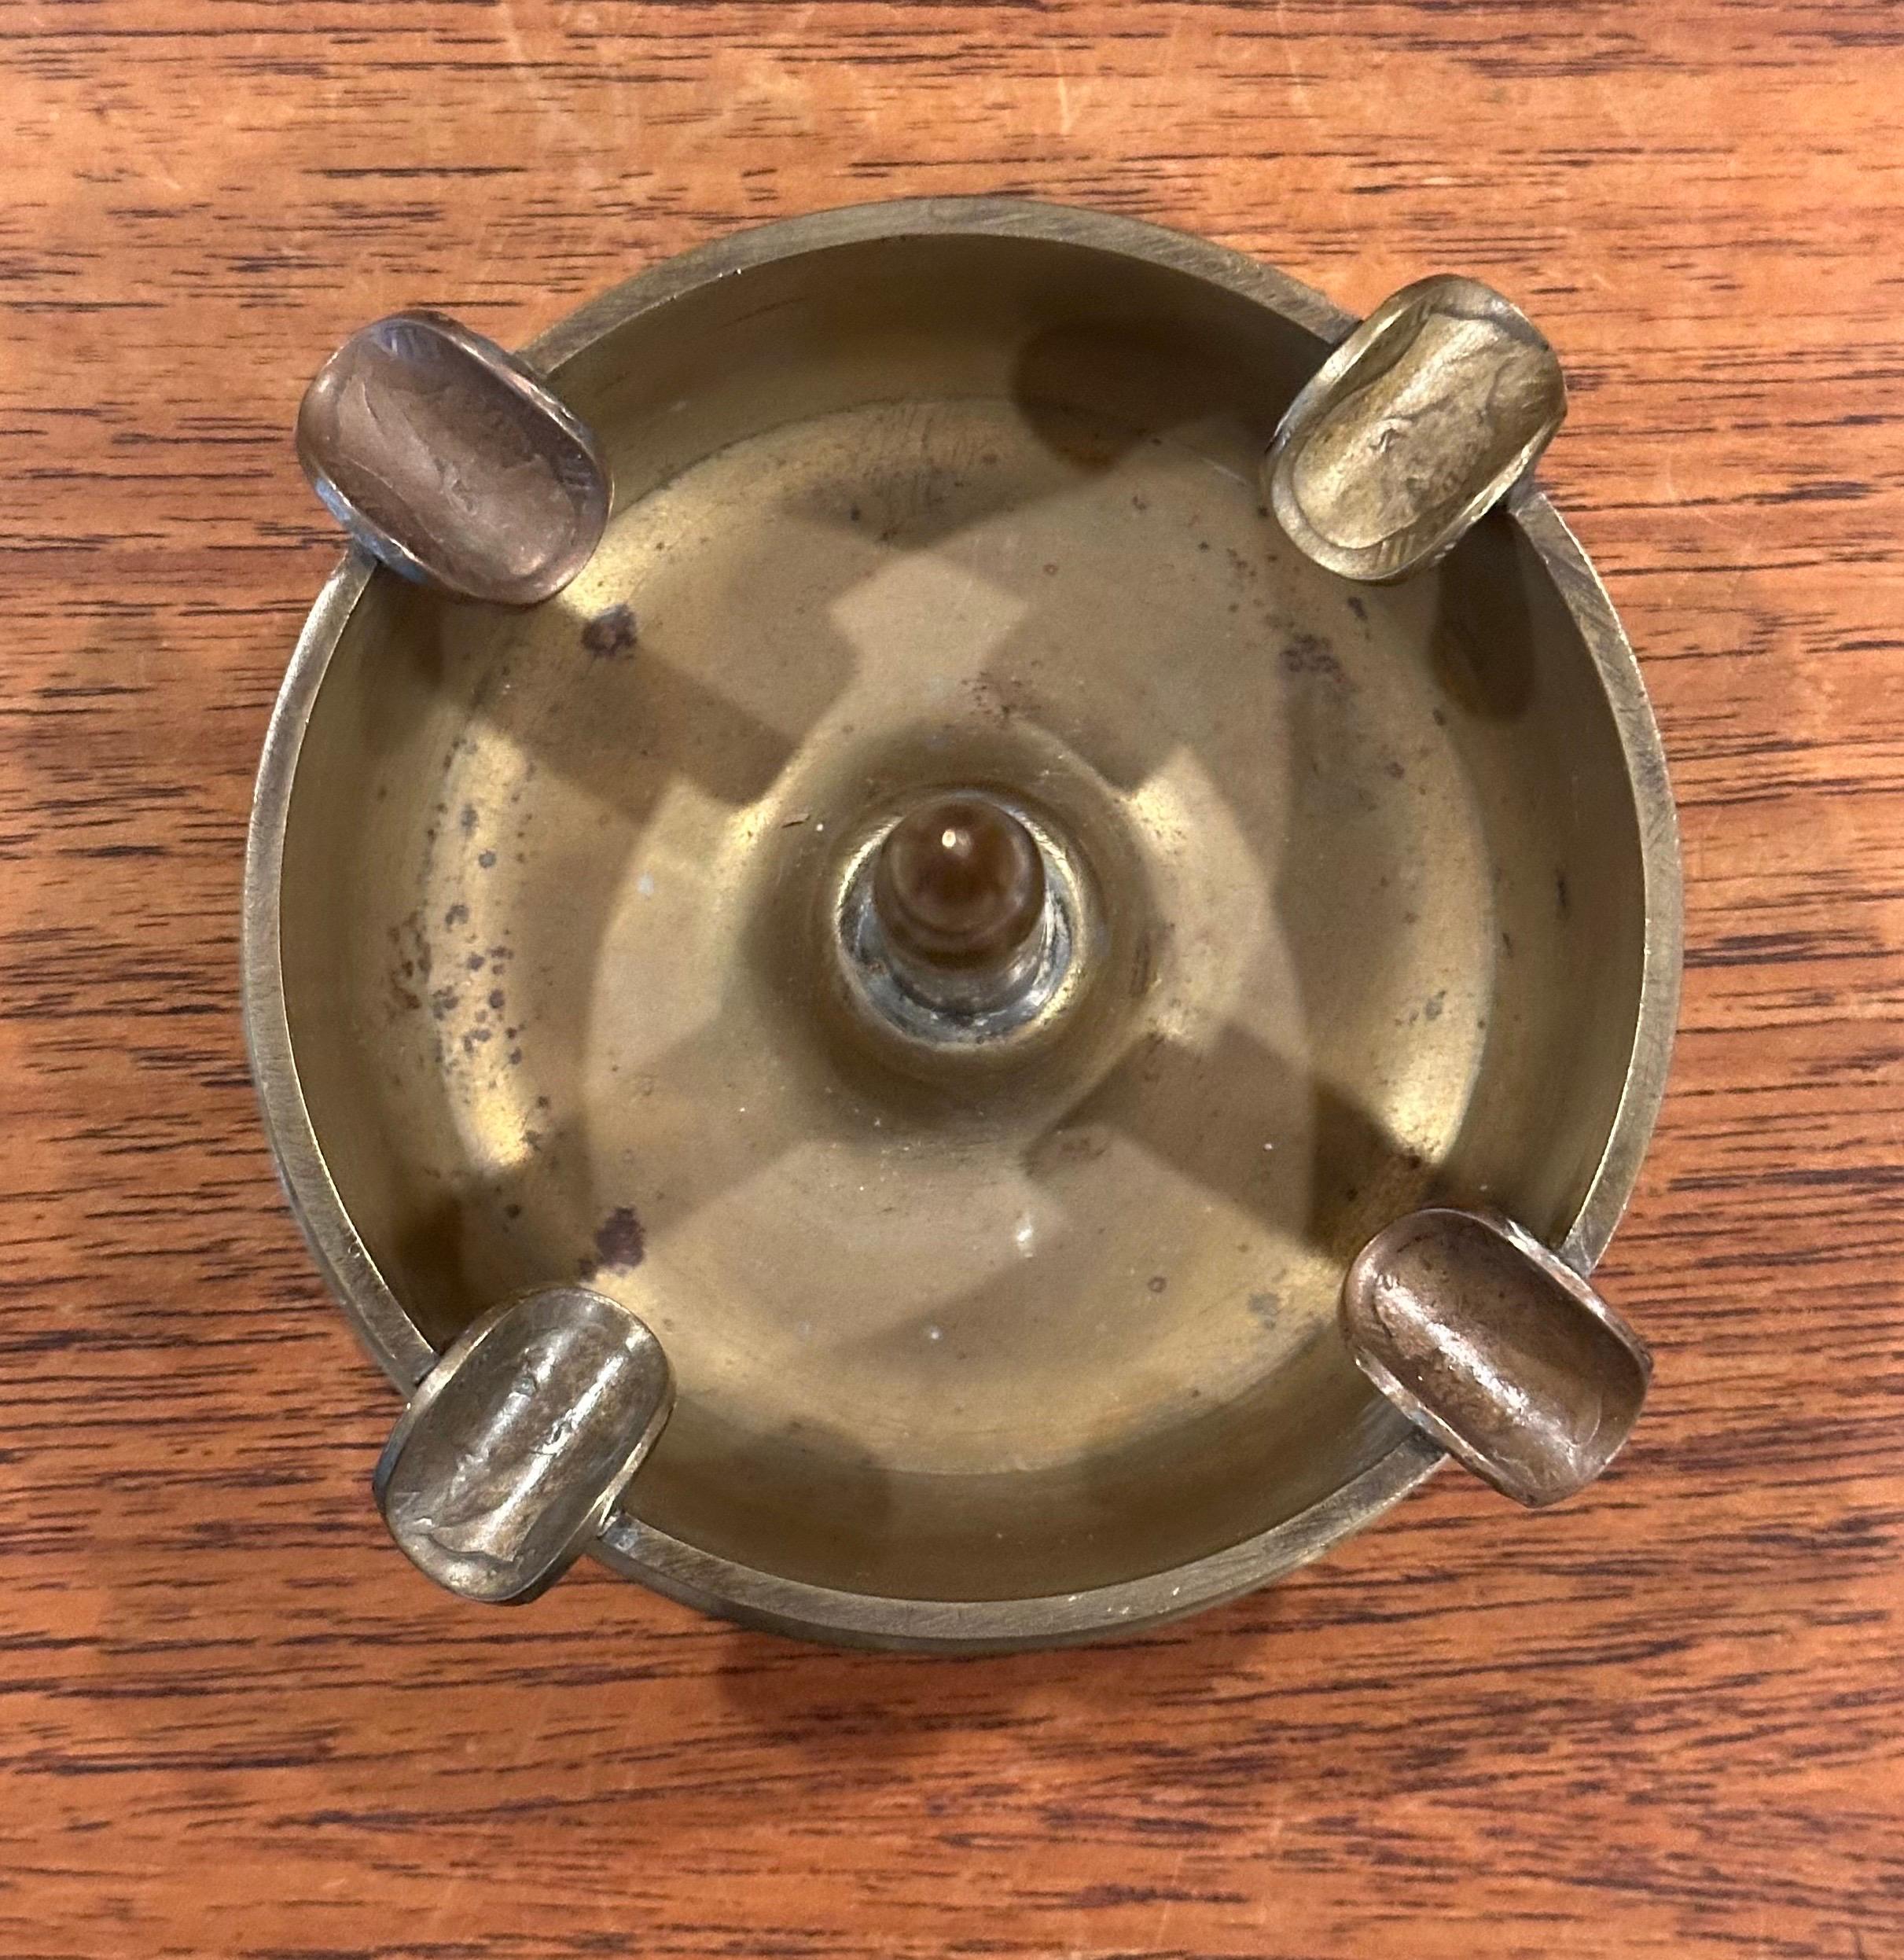 World War II Munition Trench Art Brass and Coin Ashtray For Sale 2